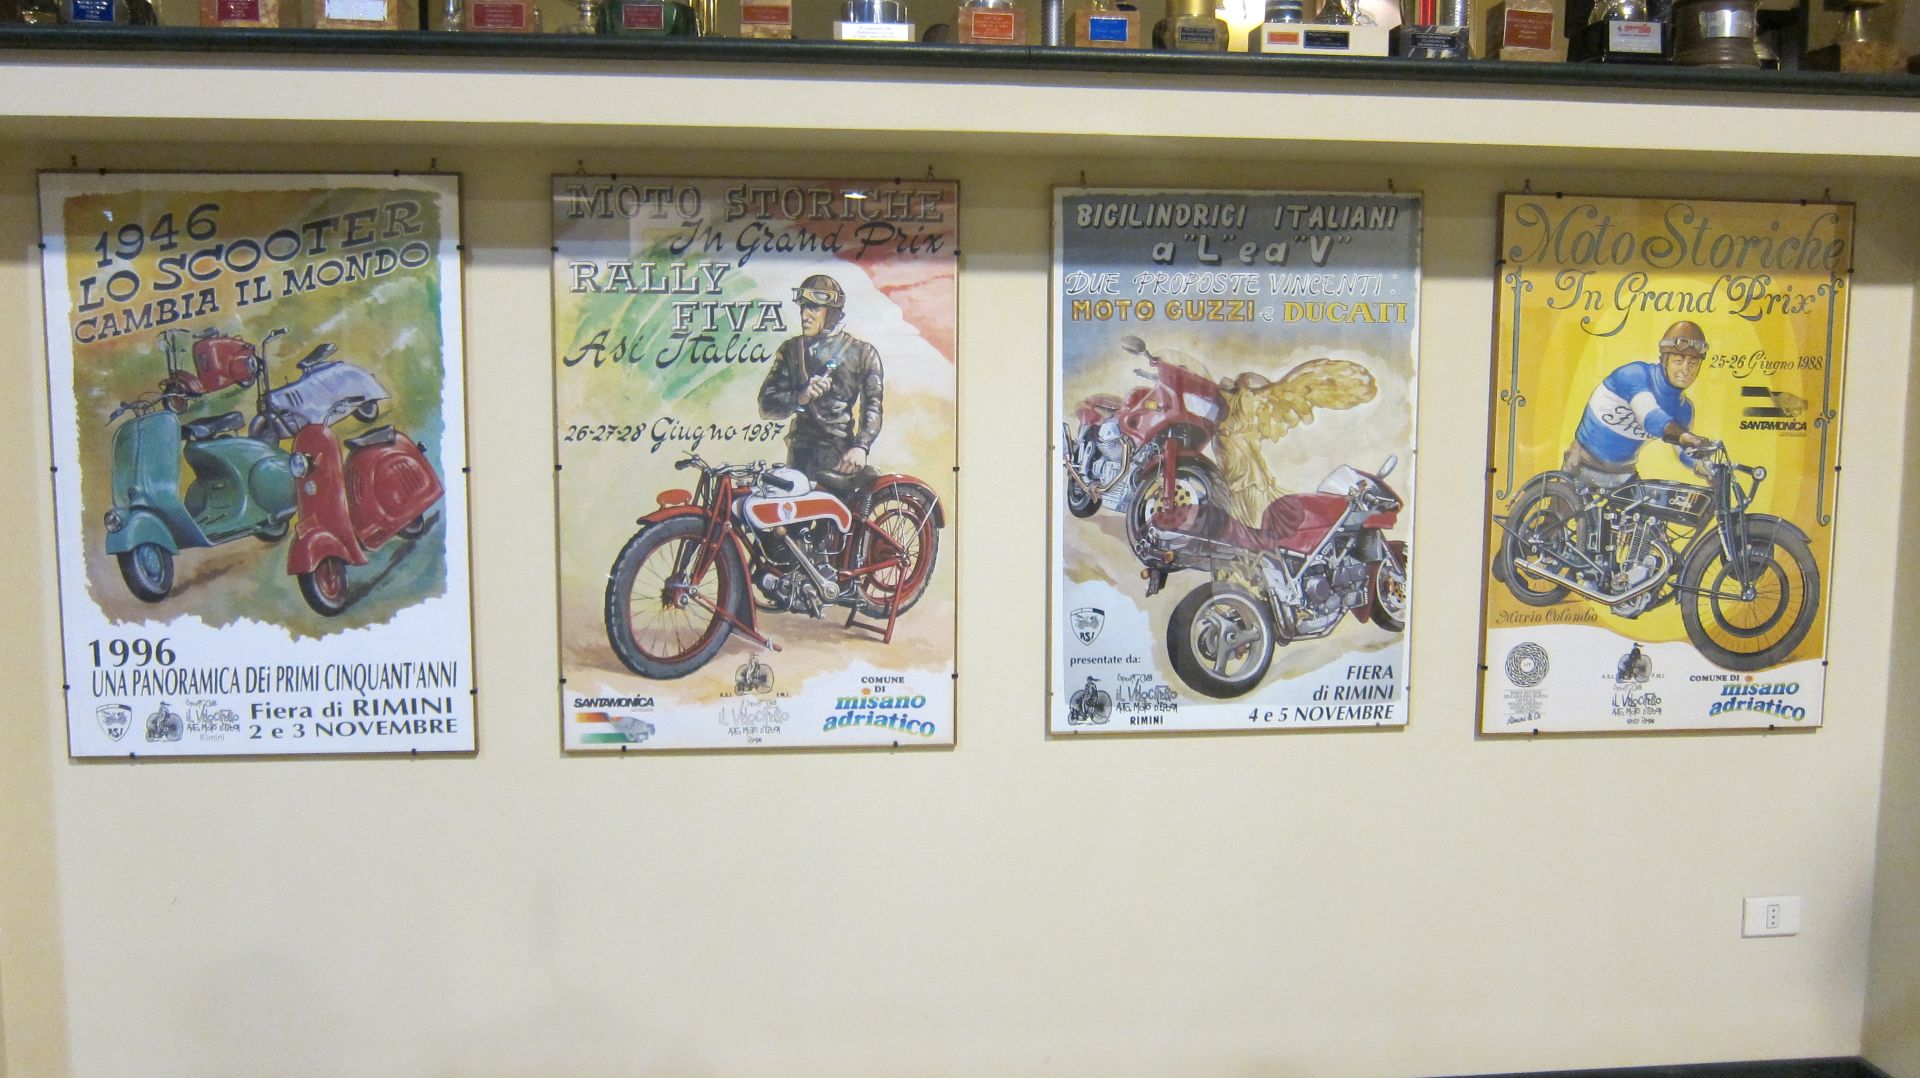 Two Moto Storiche in Grand Prix advertising posters ((4))